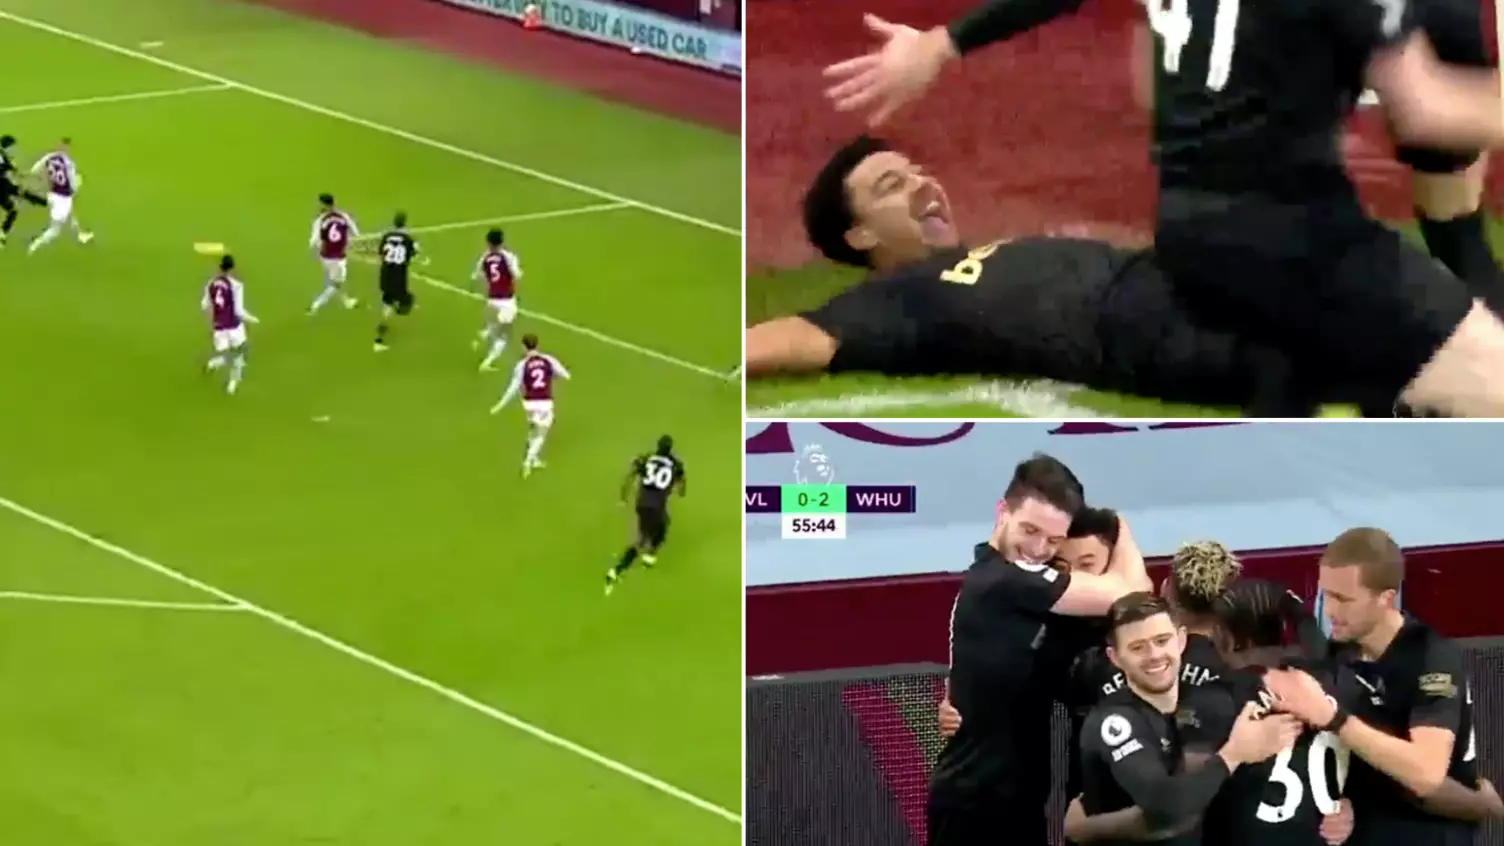 Jesse Lingard Scored On His West Ham Debut And You Could See What It Meant To Him